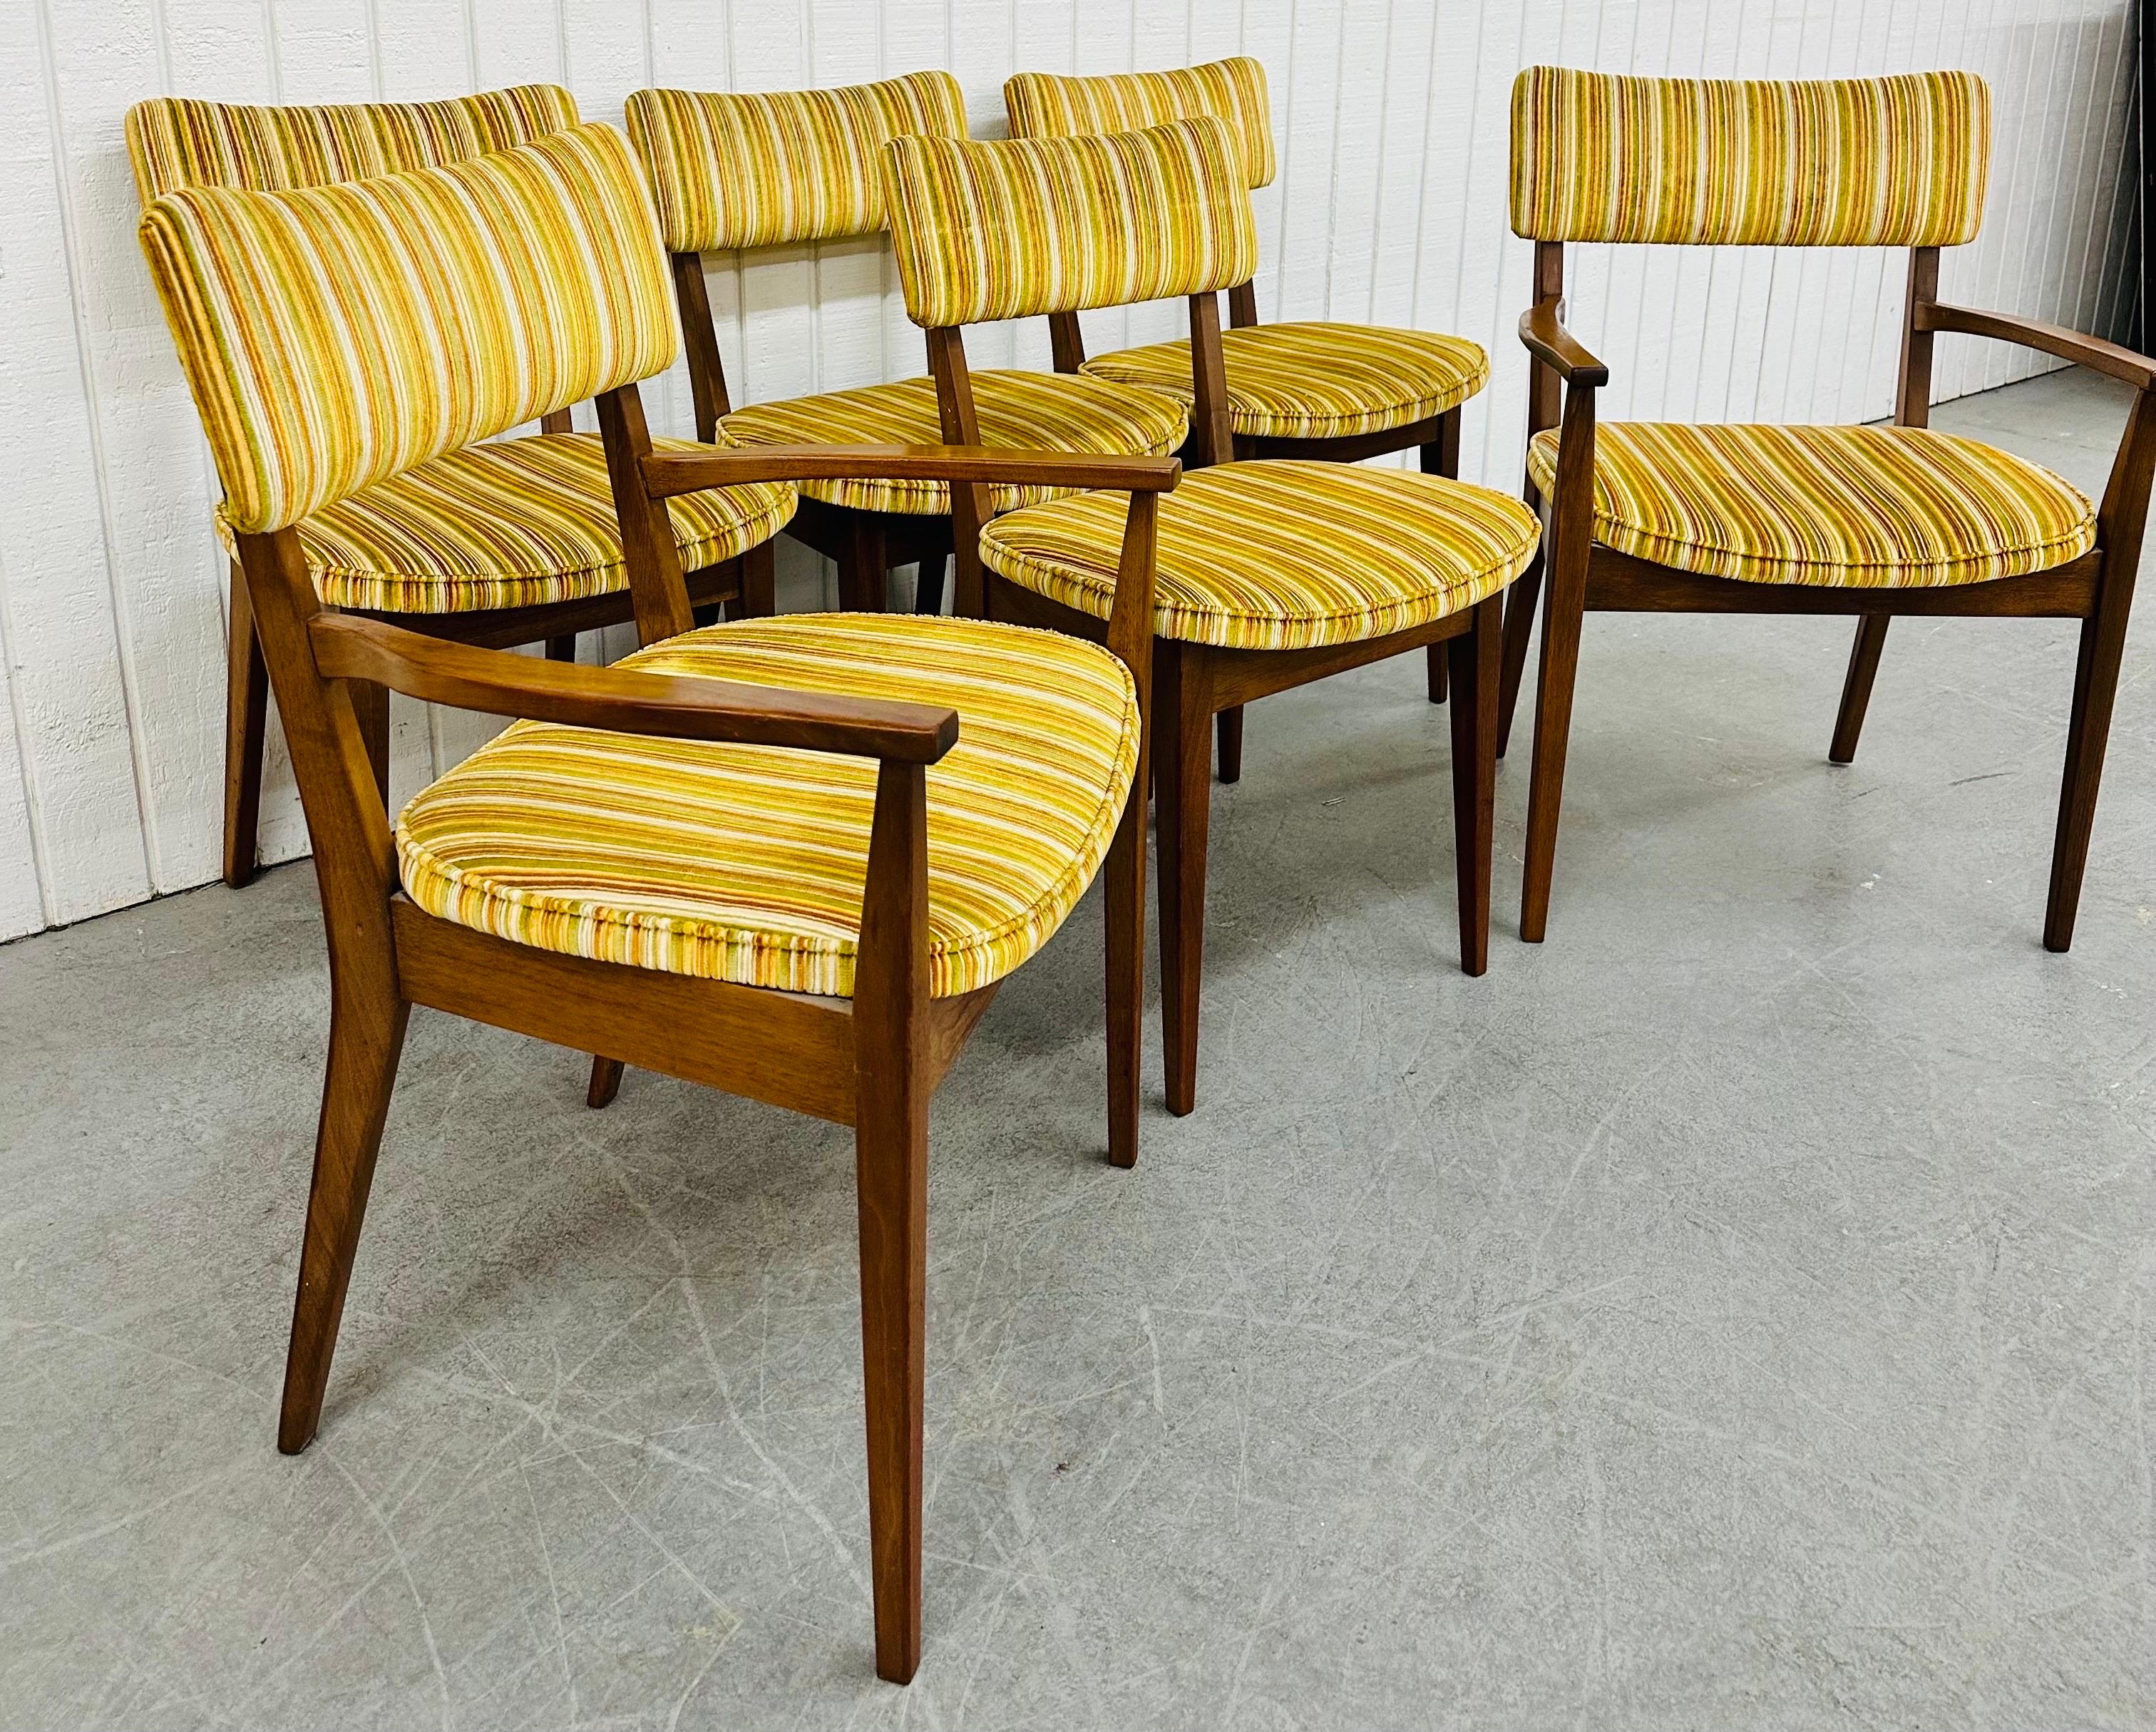 This listing is for a set of Mid-Century Modern John Stuart Walnut Dining Chairs. Featuring two arm chairs, four side chairs, original yellow striped upholstered seats / backrests, and a beautiful walnut finish. This is an exceptional combination of